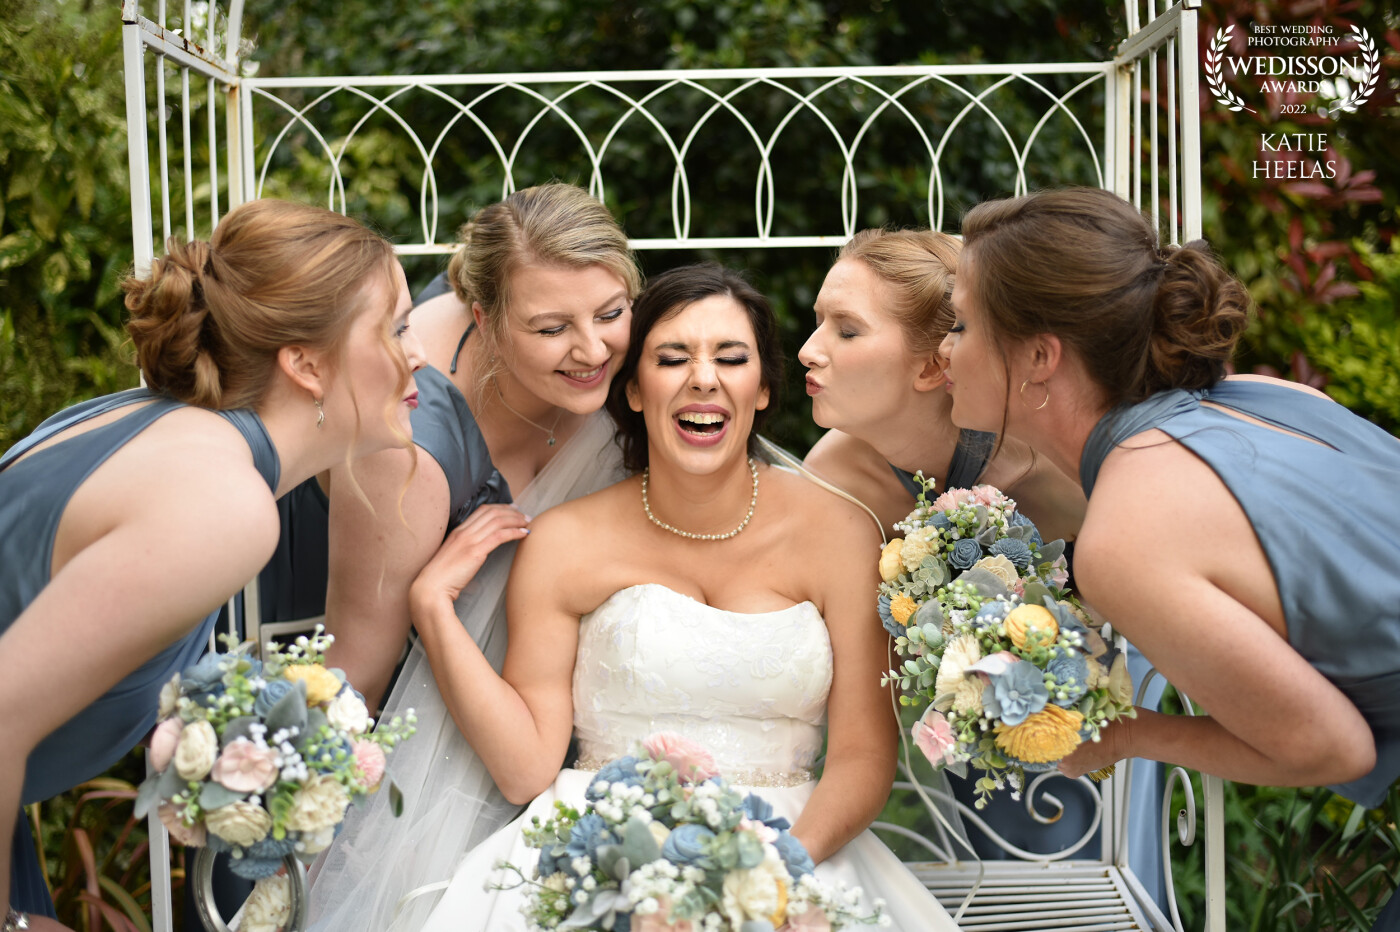 This English-Italian wedding had some seriously awesome energy!  I managed to snap the stunning Cristina, laughing as her best girls blew kisses and joked about being loved up. ..  Serious Bride squad goals right here.